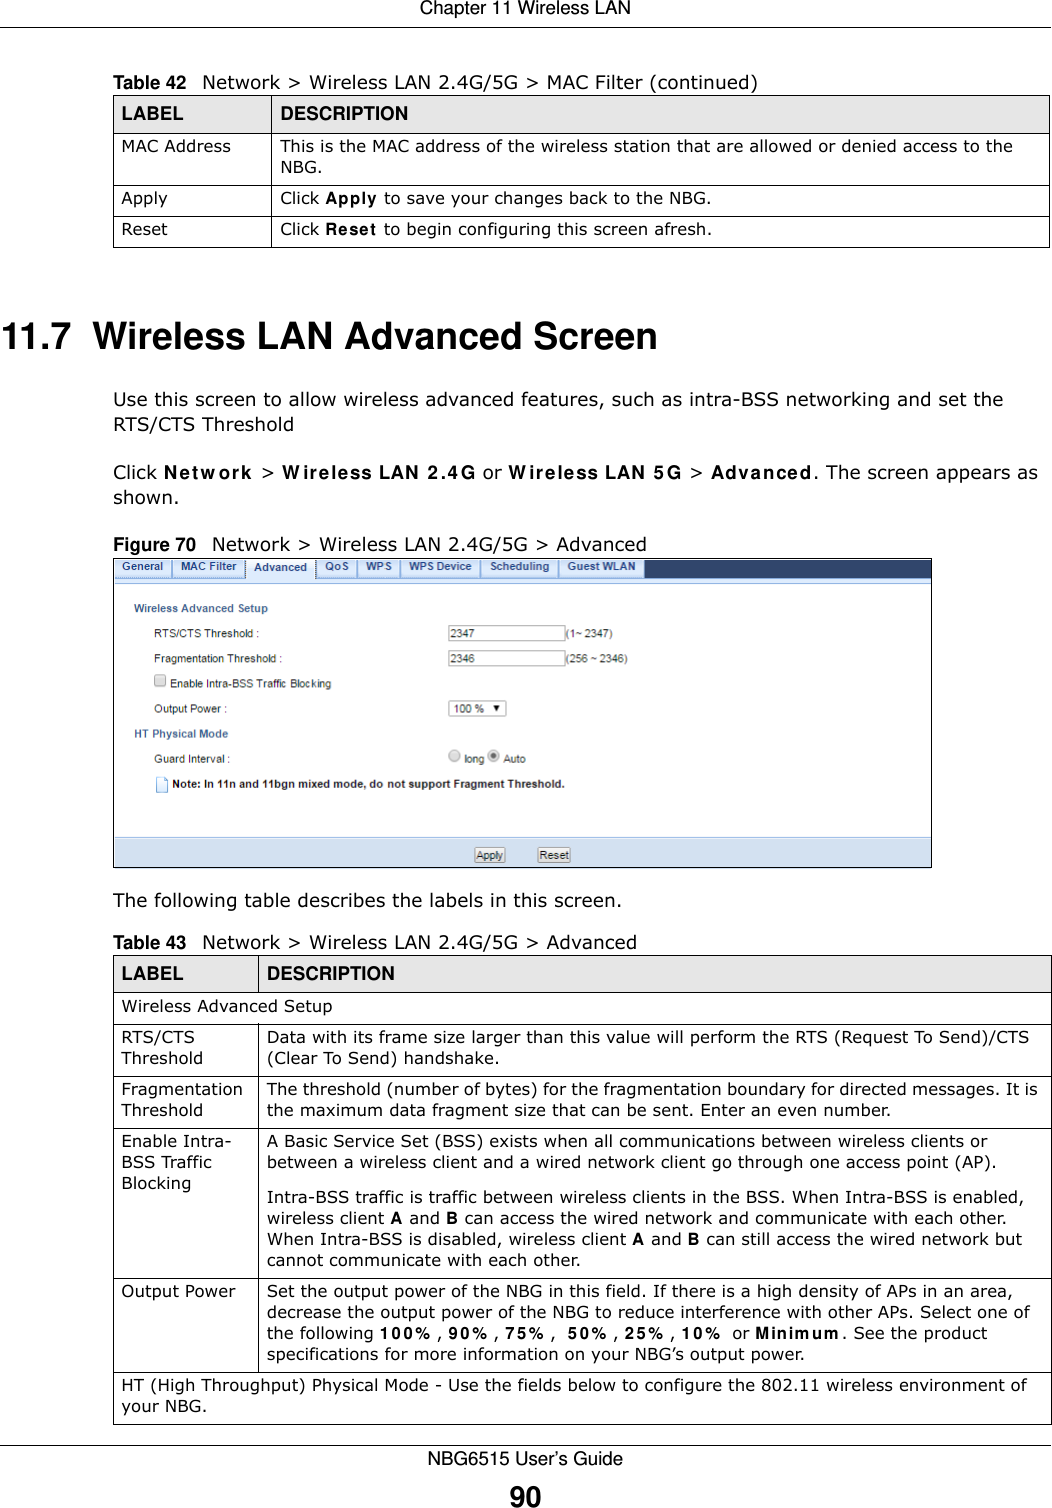 Chapter 11 Wireless LANNBG6515 User’s Guide9011.7  Wireless LAN Advanced ScreenUse this screen to allow wireless advanced features, such as intra-BSS networking and set the  RTS/CTS ThresholdClick Network &gt; Wireless LAN 2.4G or Wireless LAN 5G &gt; Advanced. The screen appears as shown.Figure 70   Network &gt; Wireless LAN 2.4G/5G &gt; AdvancedThe following table describes the labels in this screen. MAC Address This is the MAC address of the wireless station that are allowed or denied access to the NBG.Apply Click Apply to save your changes back to the NBG.Reset Click Reset to begin configuring this screen afresh.Table 42   Network &gt; Wireless LAN 2.4G/5G &gt; MAC Filter (continued)LABEL DESCRIPTIONTable 43   Network &gt; Wireless LAN 2.4G/5G &gt; AdvancedLABEL DESCRIPTIONWireless Advanced SetupRTS/CTS ThresholdData with its frame size larger than this value will perform the RTS (Request To Send)/CTS (Clear To Send) handshake. Fragmentation ThresholdThe threshold (number of bytes) for the fragmentation boundary for directed messages. It is the maximum data fragment size that can be sent. Enter an even number.Enable Intra-BSS Traffic BlockingA Basic Service Set (BSS) exists when all communications between wireless clients or between a wireless client and a wired network client go through one access point (AP). Intra-BSS traffic is traffic between wireless clients in the BSS. When Intra-BSS is enabled, wireless client A and B can access the wired network and communicate with each other. When Intra-BSS is disabled, wireless client A and B can still access the wired network but cannot communicate with each other.Output Power Set the output power of the NBG in this field. If there is a high density of APs in an area, decrease the output power of the NBG to reduce interference with other APs. Select one of the following 100%, 90%, 75%,  50%, 25%, 10% or Minimum. See the product specifications for more information on your NBG’s output power.HT (High Throughput) Physical Mode - Use the fields below to configure the 802.11 wireless environment of your NBG. 